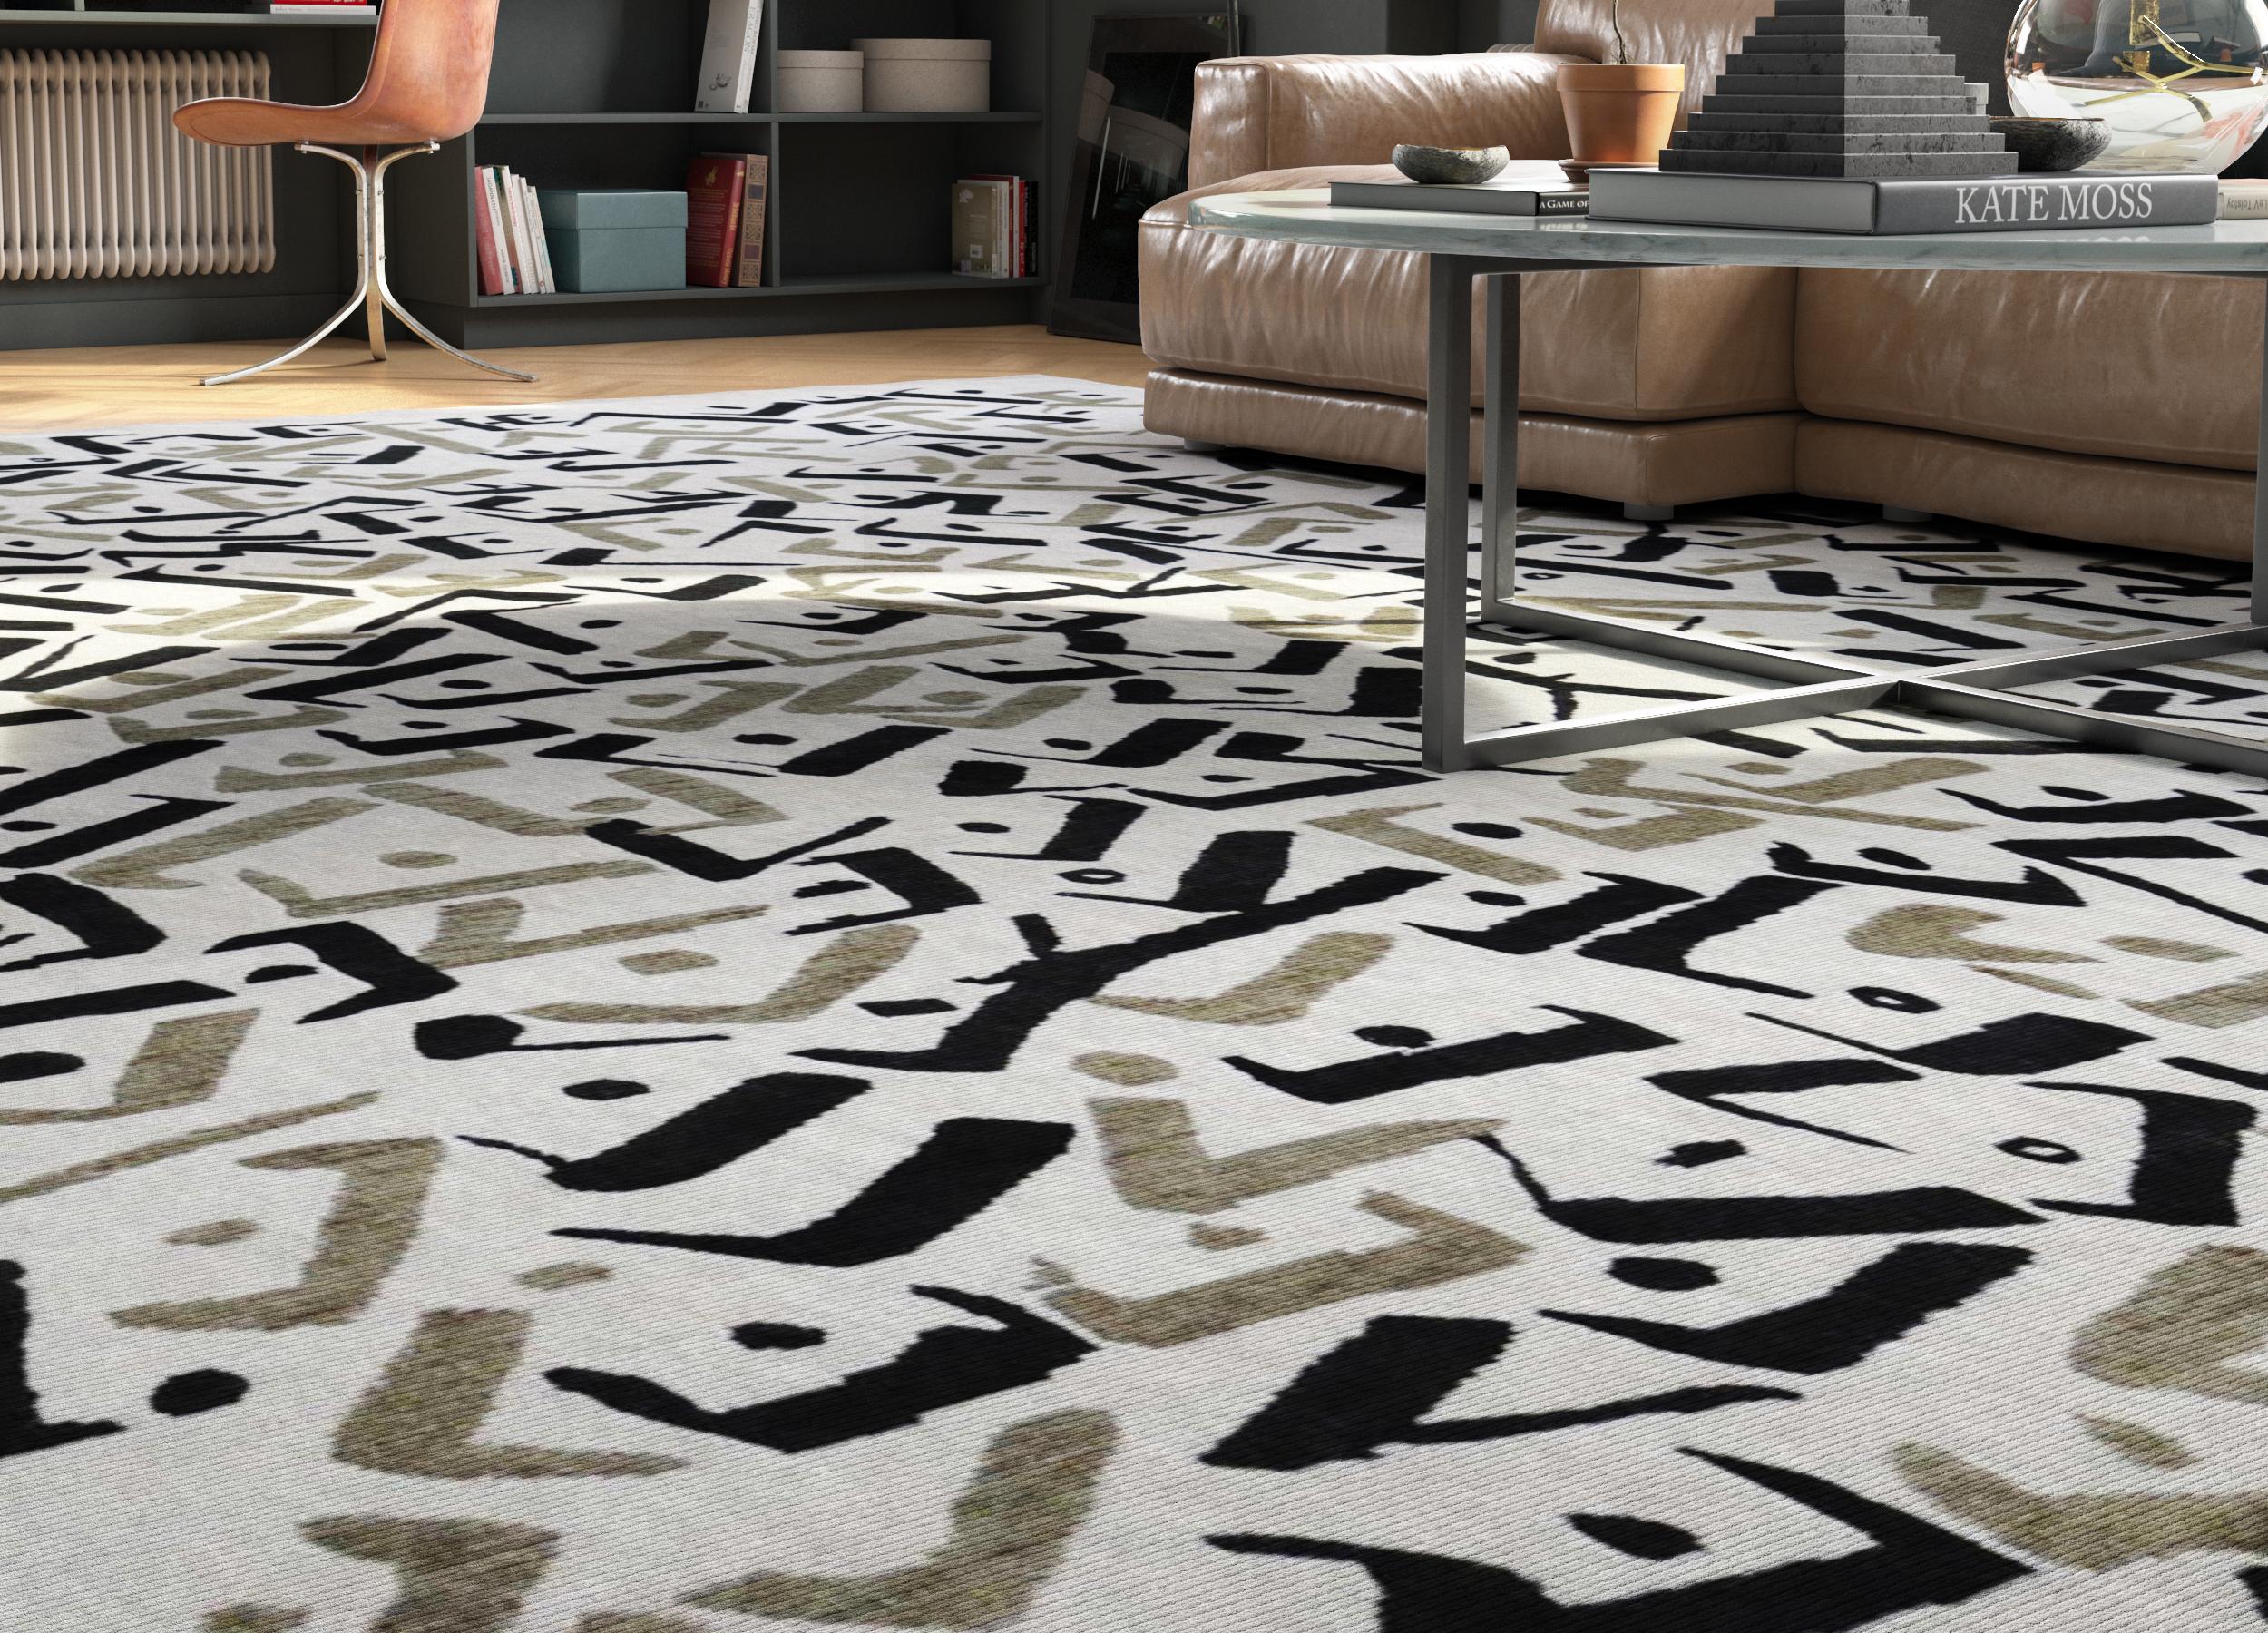 This rug uses abstract patterns using one word or phrase (in this case, 